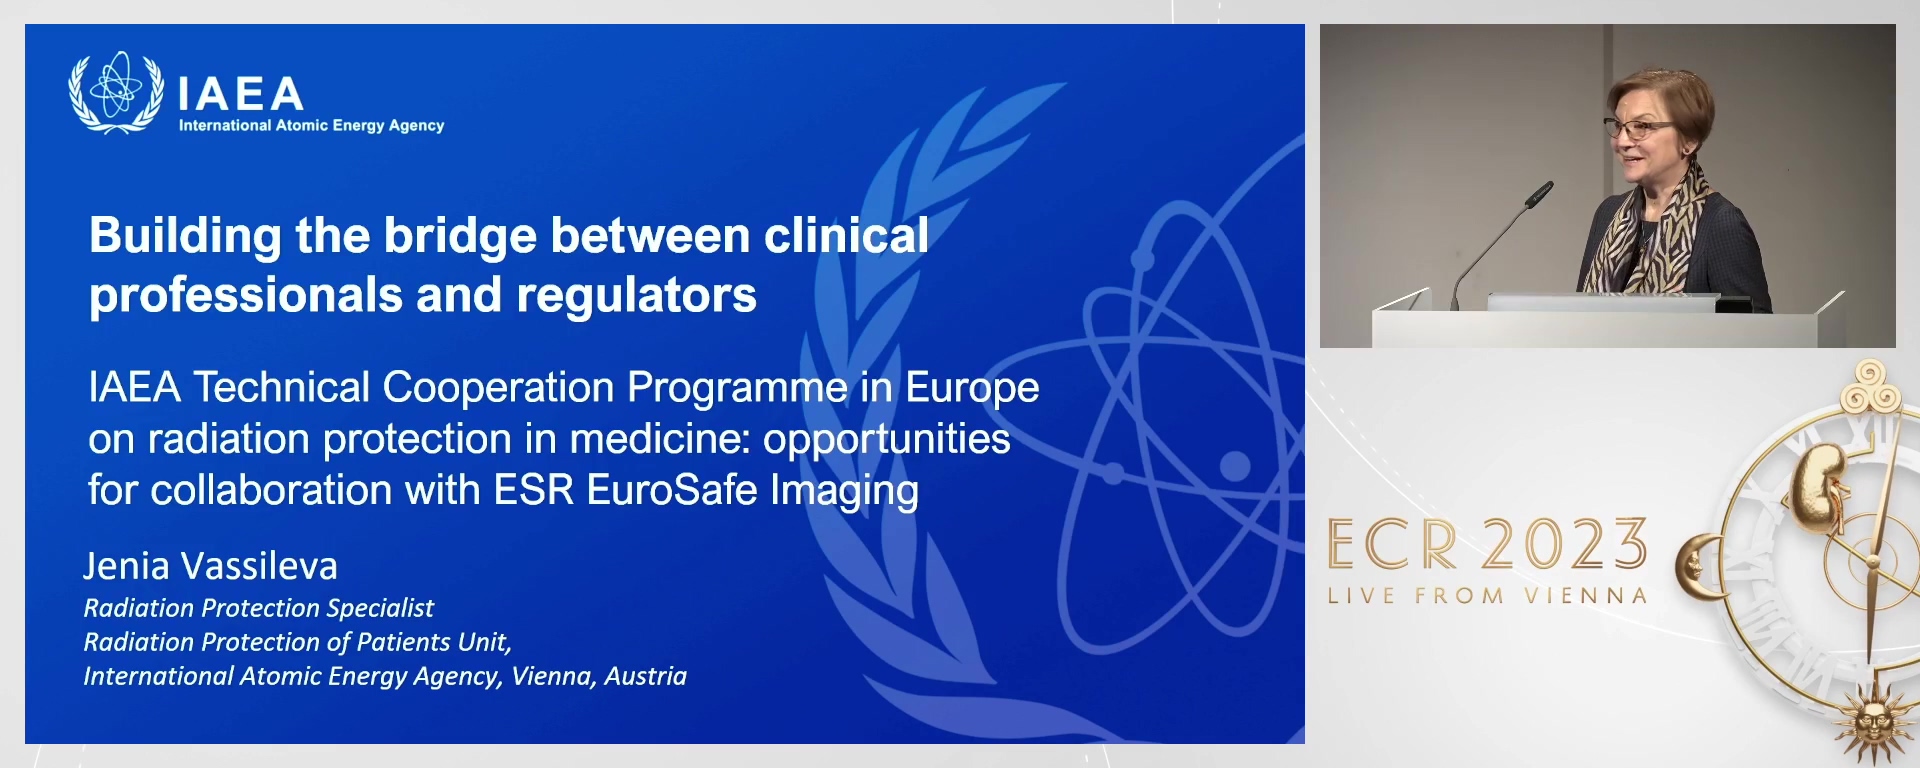 Building the bridge between clinical professionals and regulators. IAEA Technical Cooperation Programme in Europe on radiation protection in medicine: opportunities for collaboration with ESR EuroSafe Imaging - Jenia  Vassileva, Vienna / AT